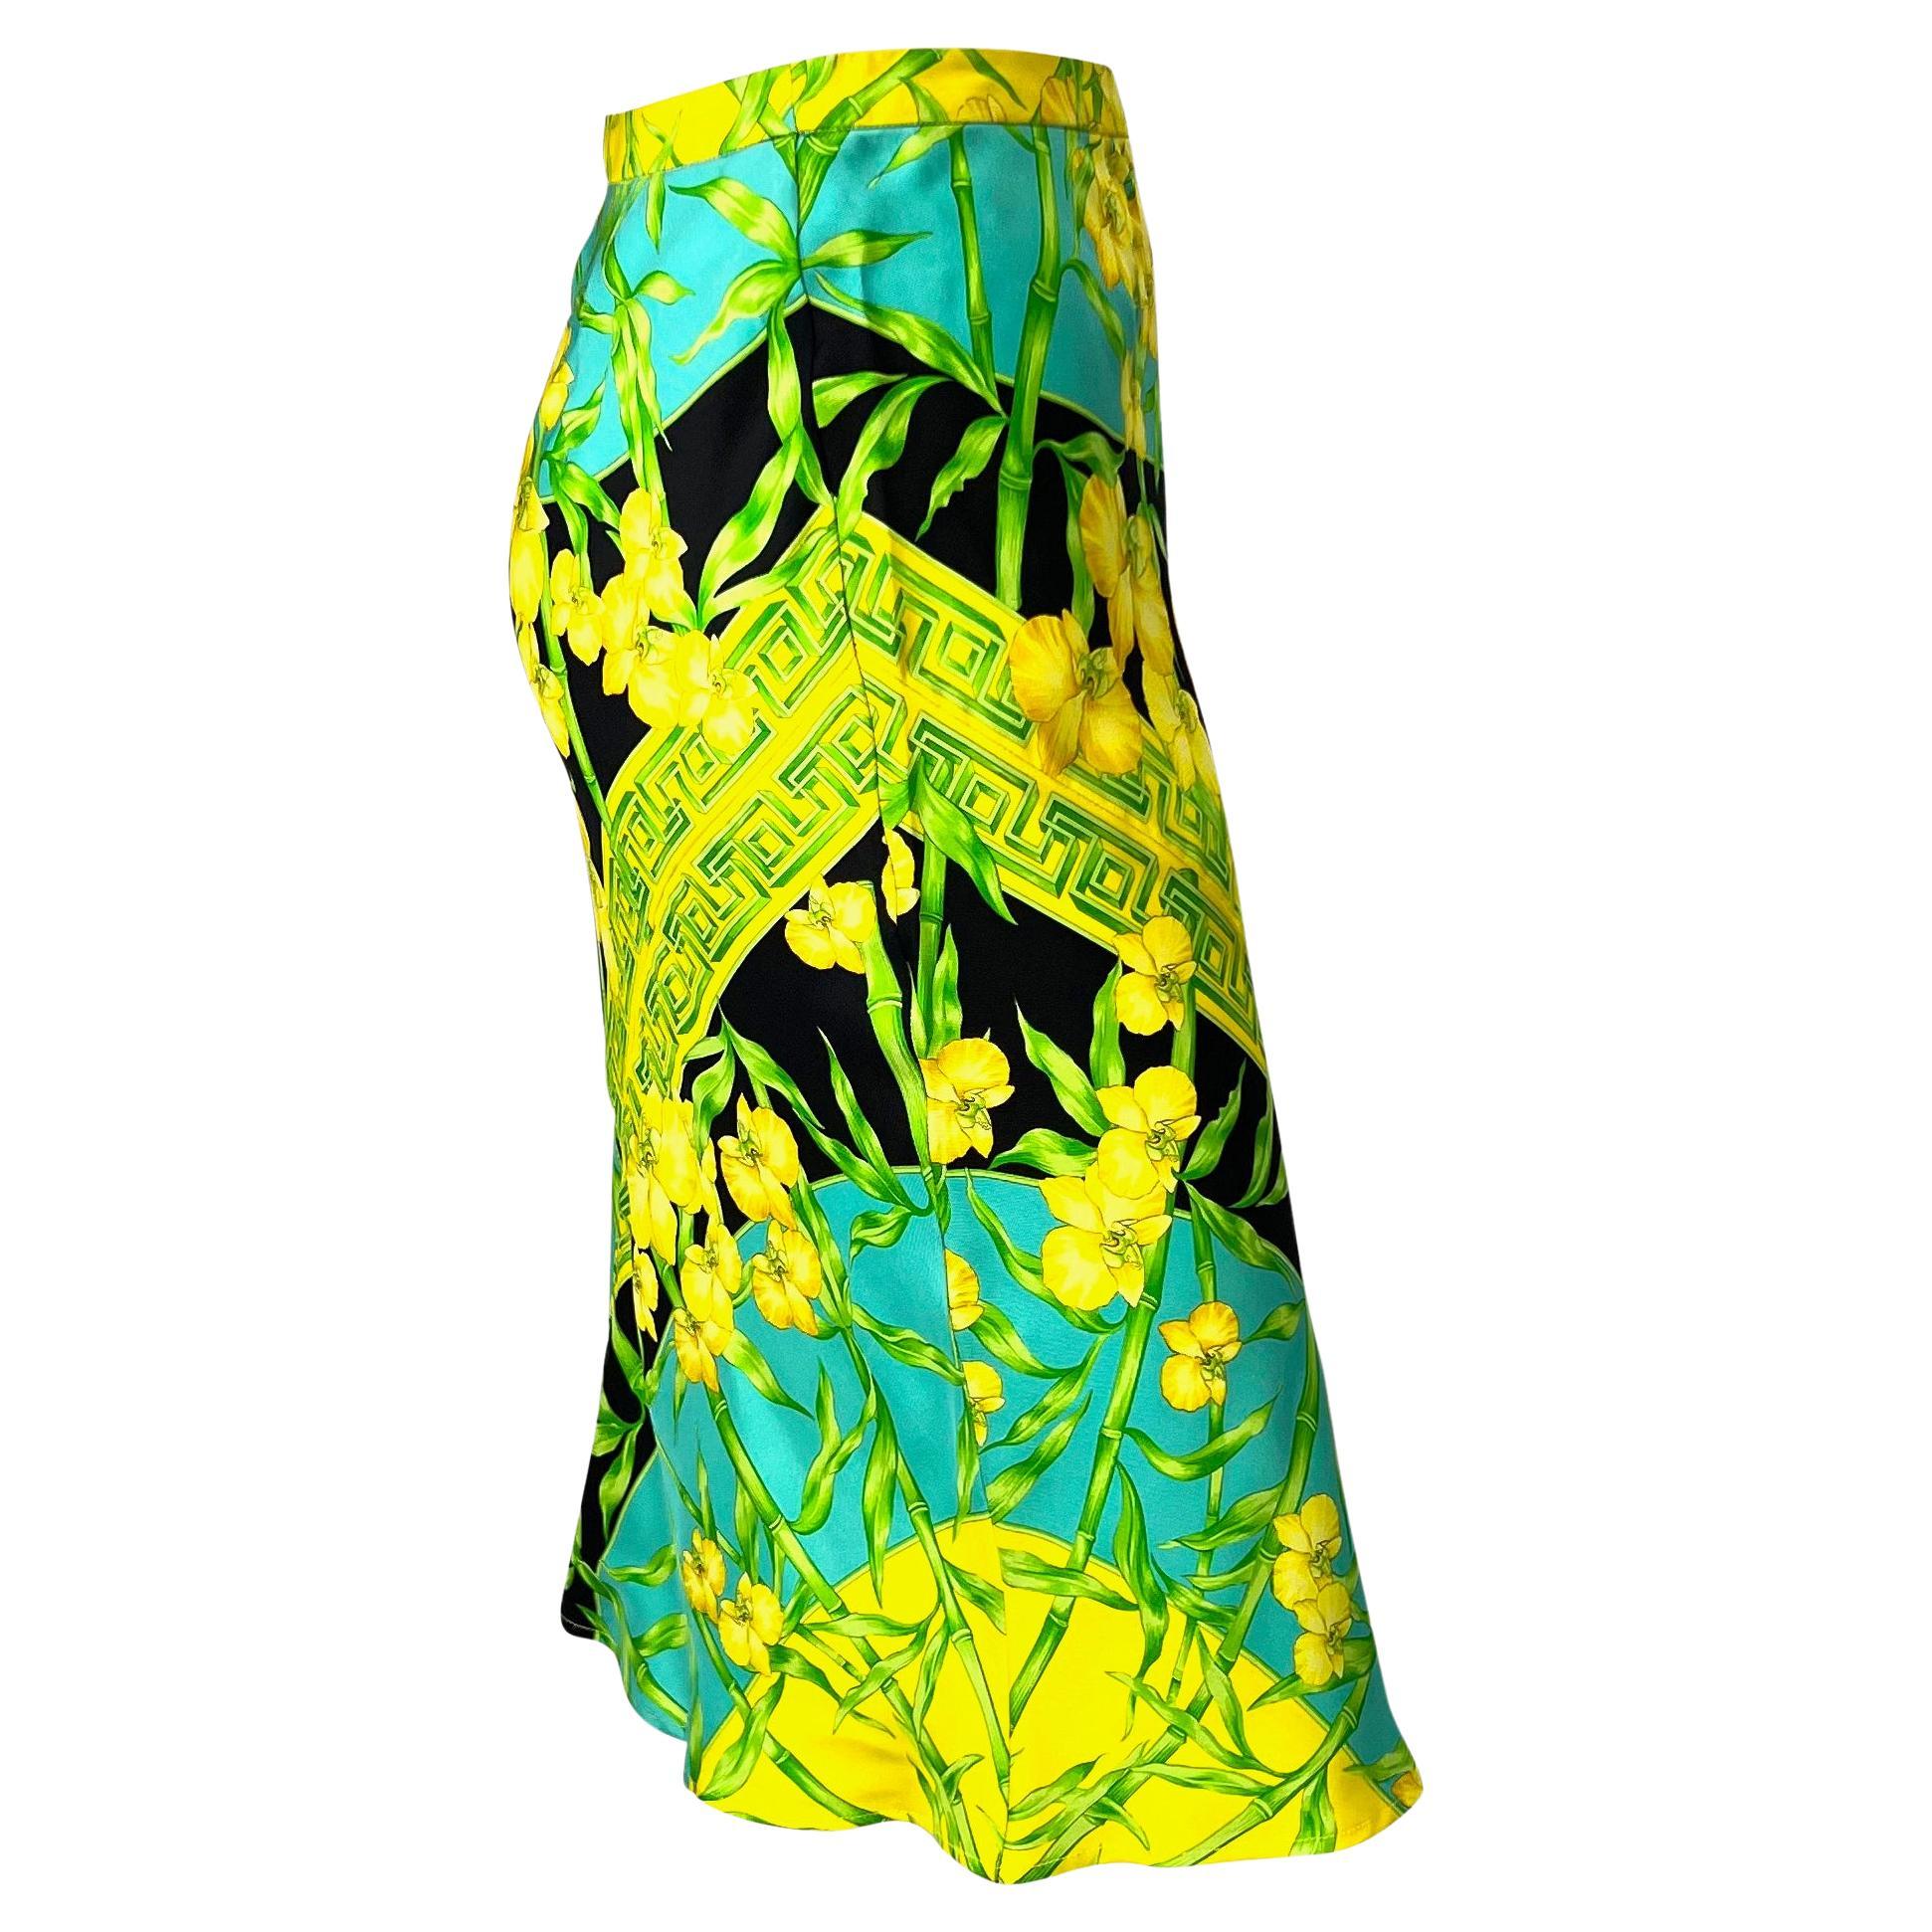 S/S 2000 Gianni Versace by Donatella Orchid Greek Key Jungle Print Silk Skirt In Excellent Condition For Sale In West Hollywood, CA